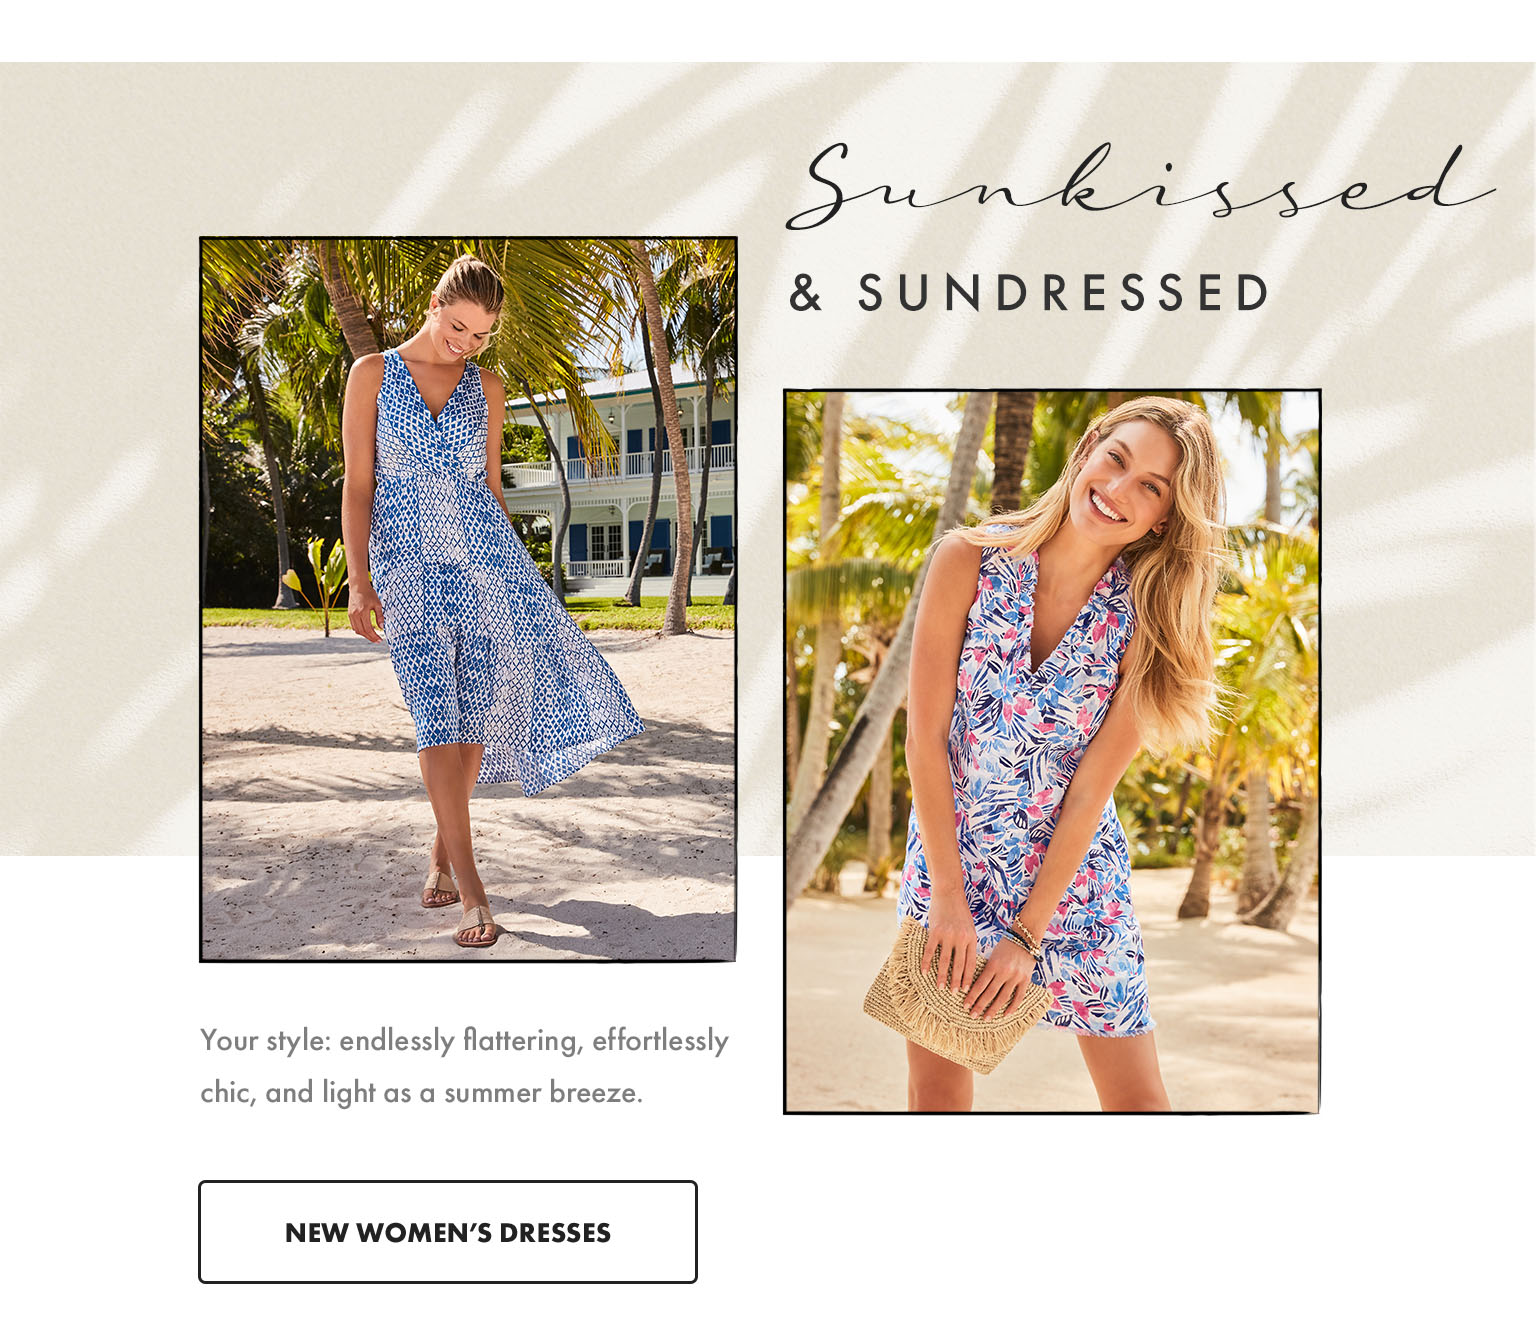 Summer Dresses - Your style: endlessly flattering, effortlessly chic, and light as a summer breeze. 